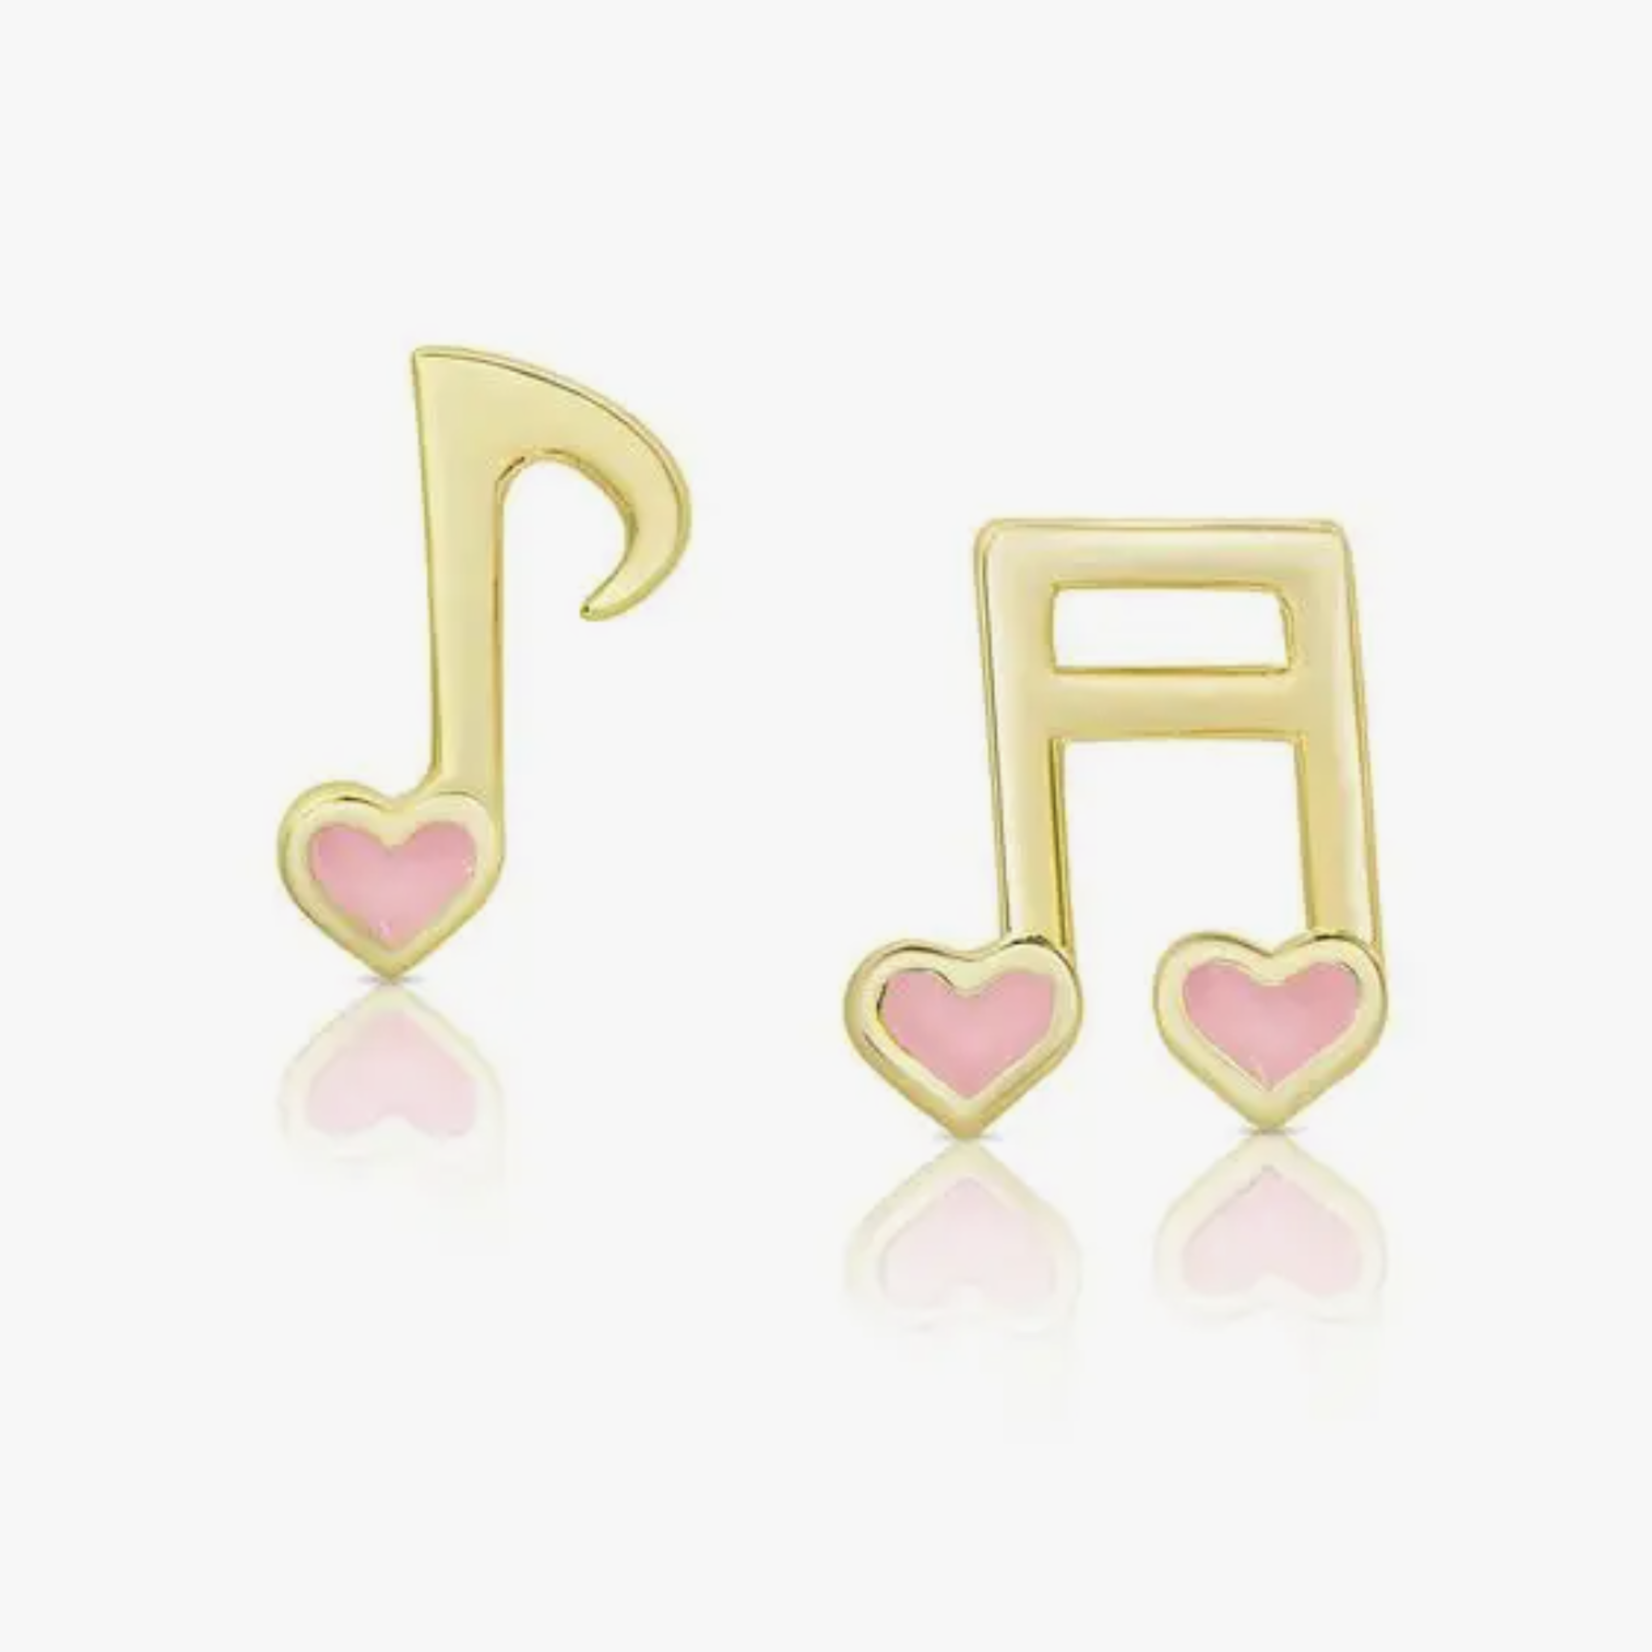 Lily Nilly - 18K Gold Earrings Musical Notes Pink Studs